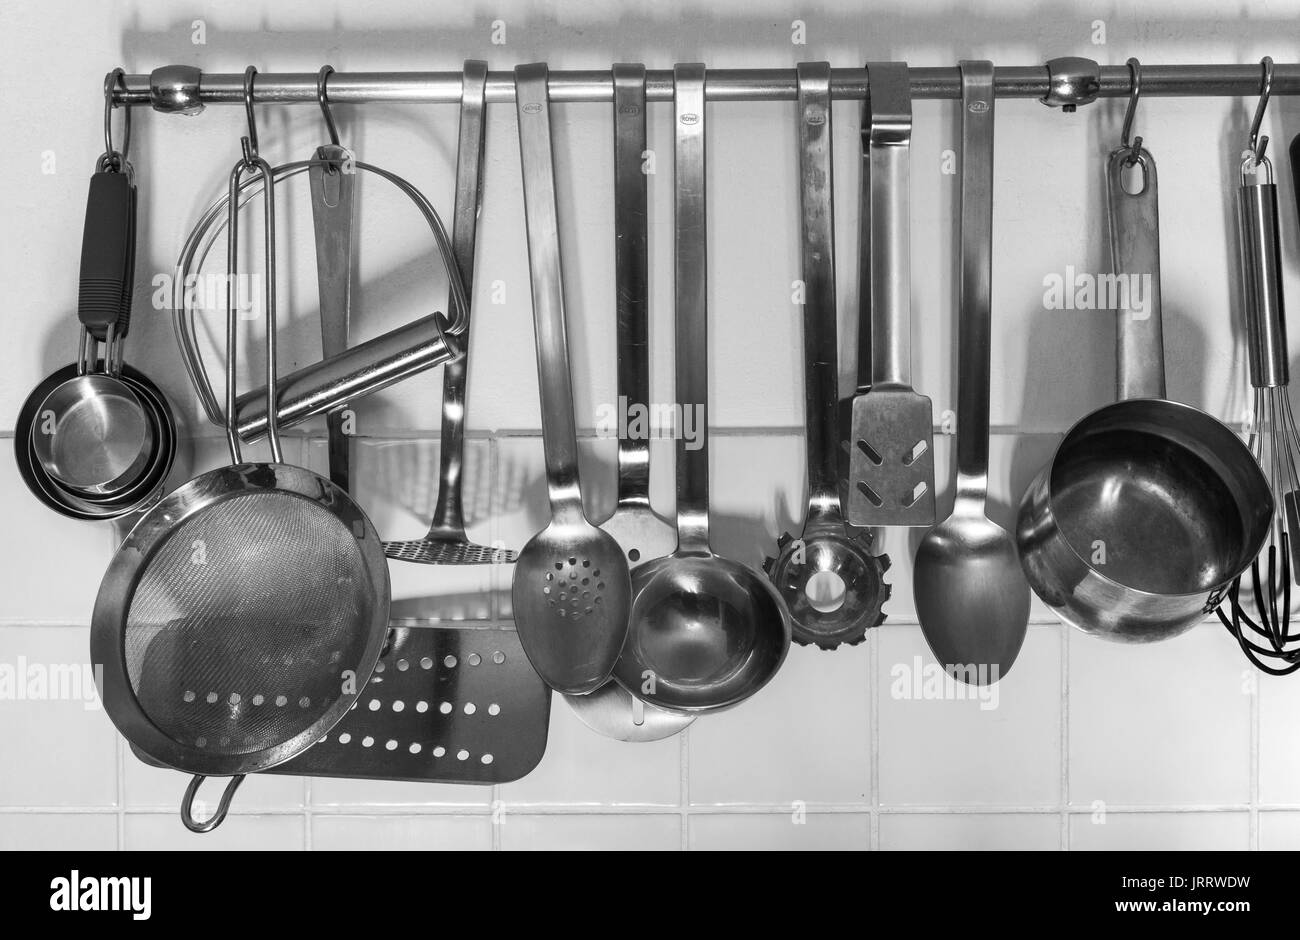 Various kitchen utensils hanging from a rack Stock Photo